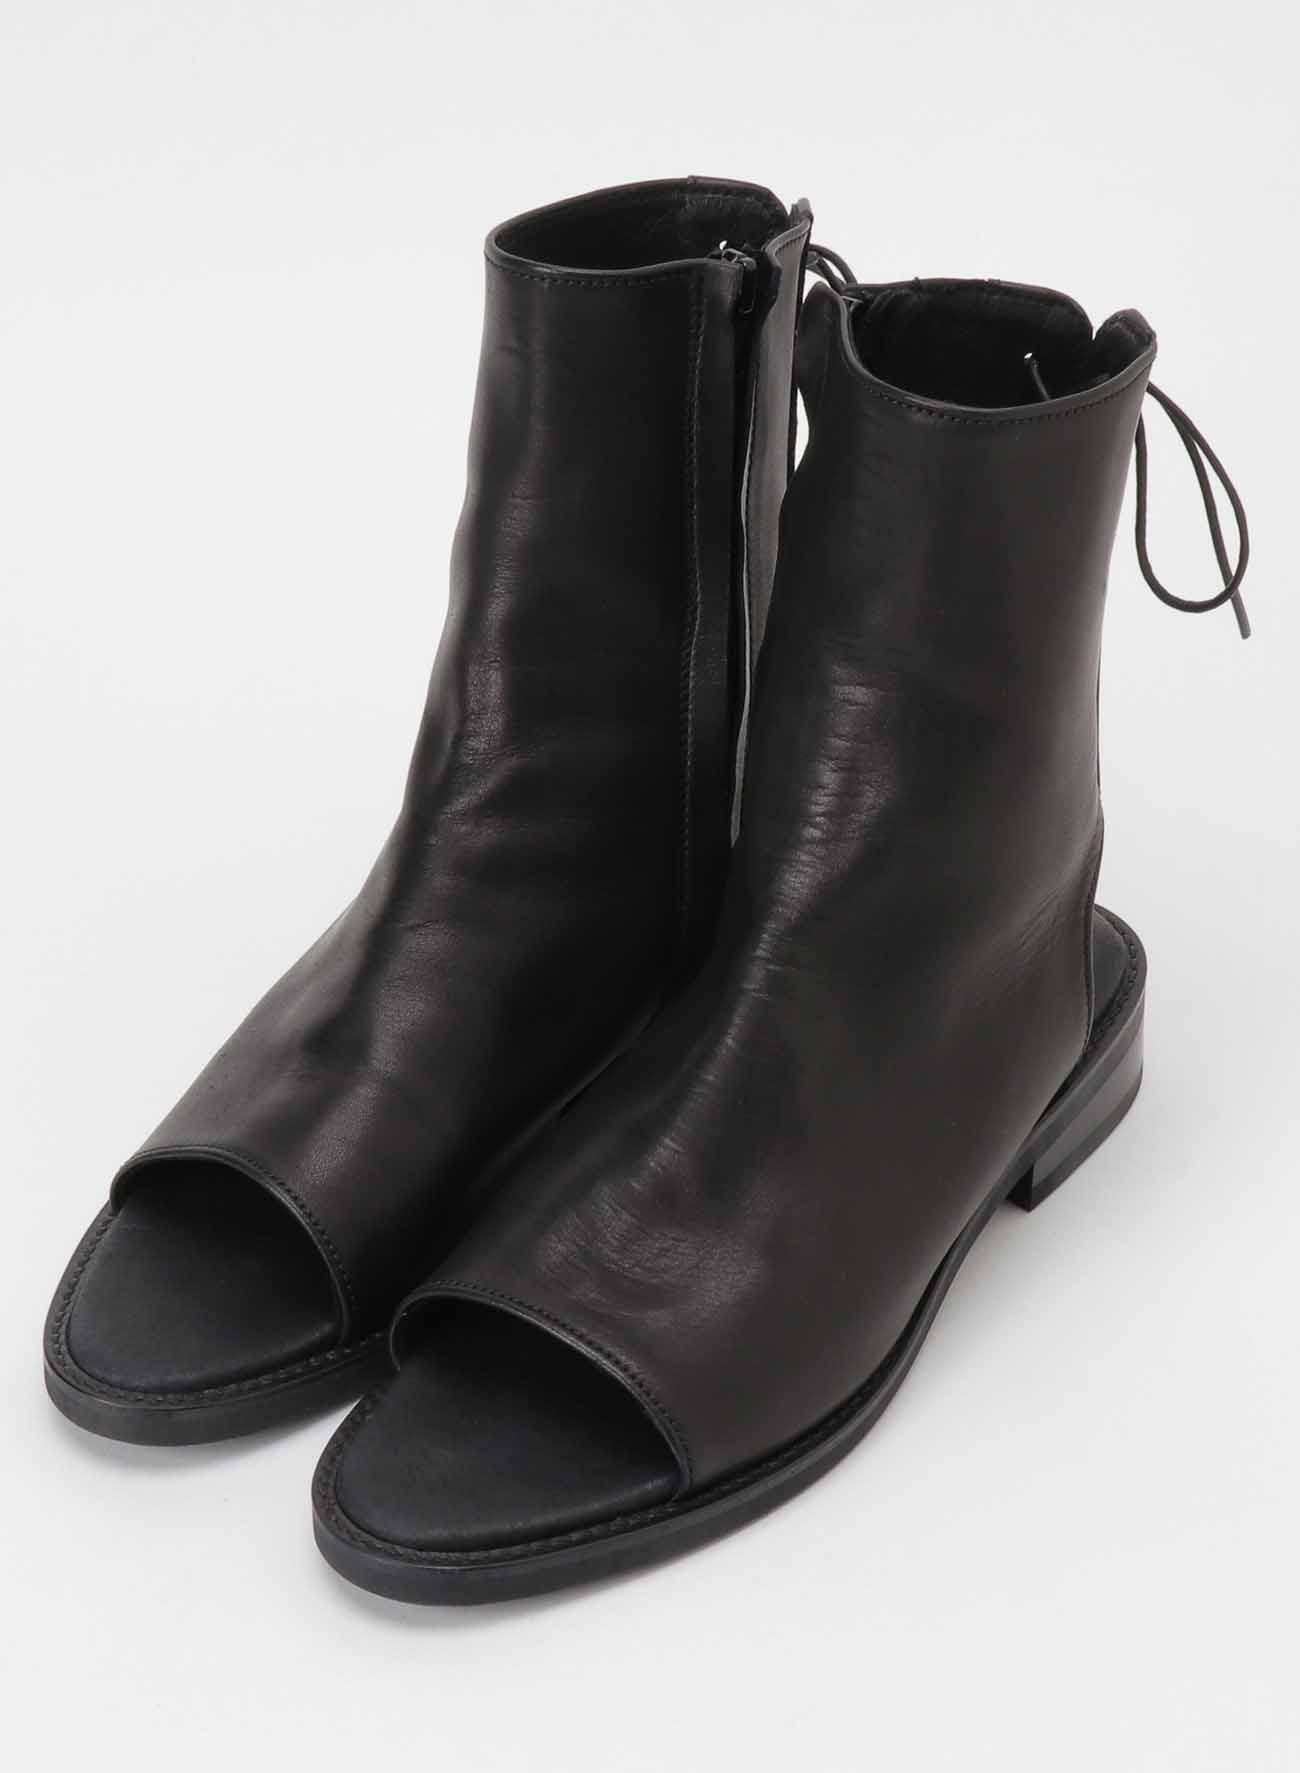 SOFT SMOOTH LEATHER OPEN TOE ONE HEEL BOOTS